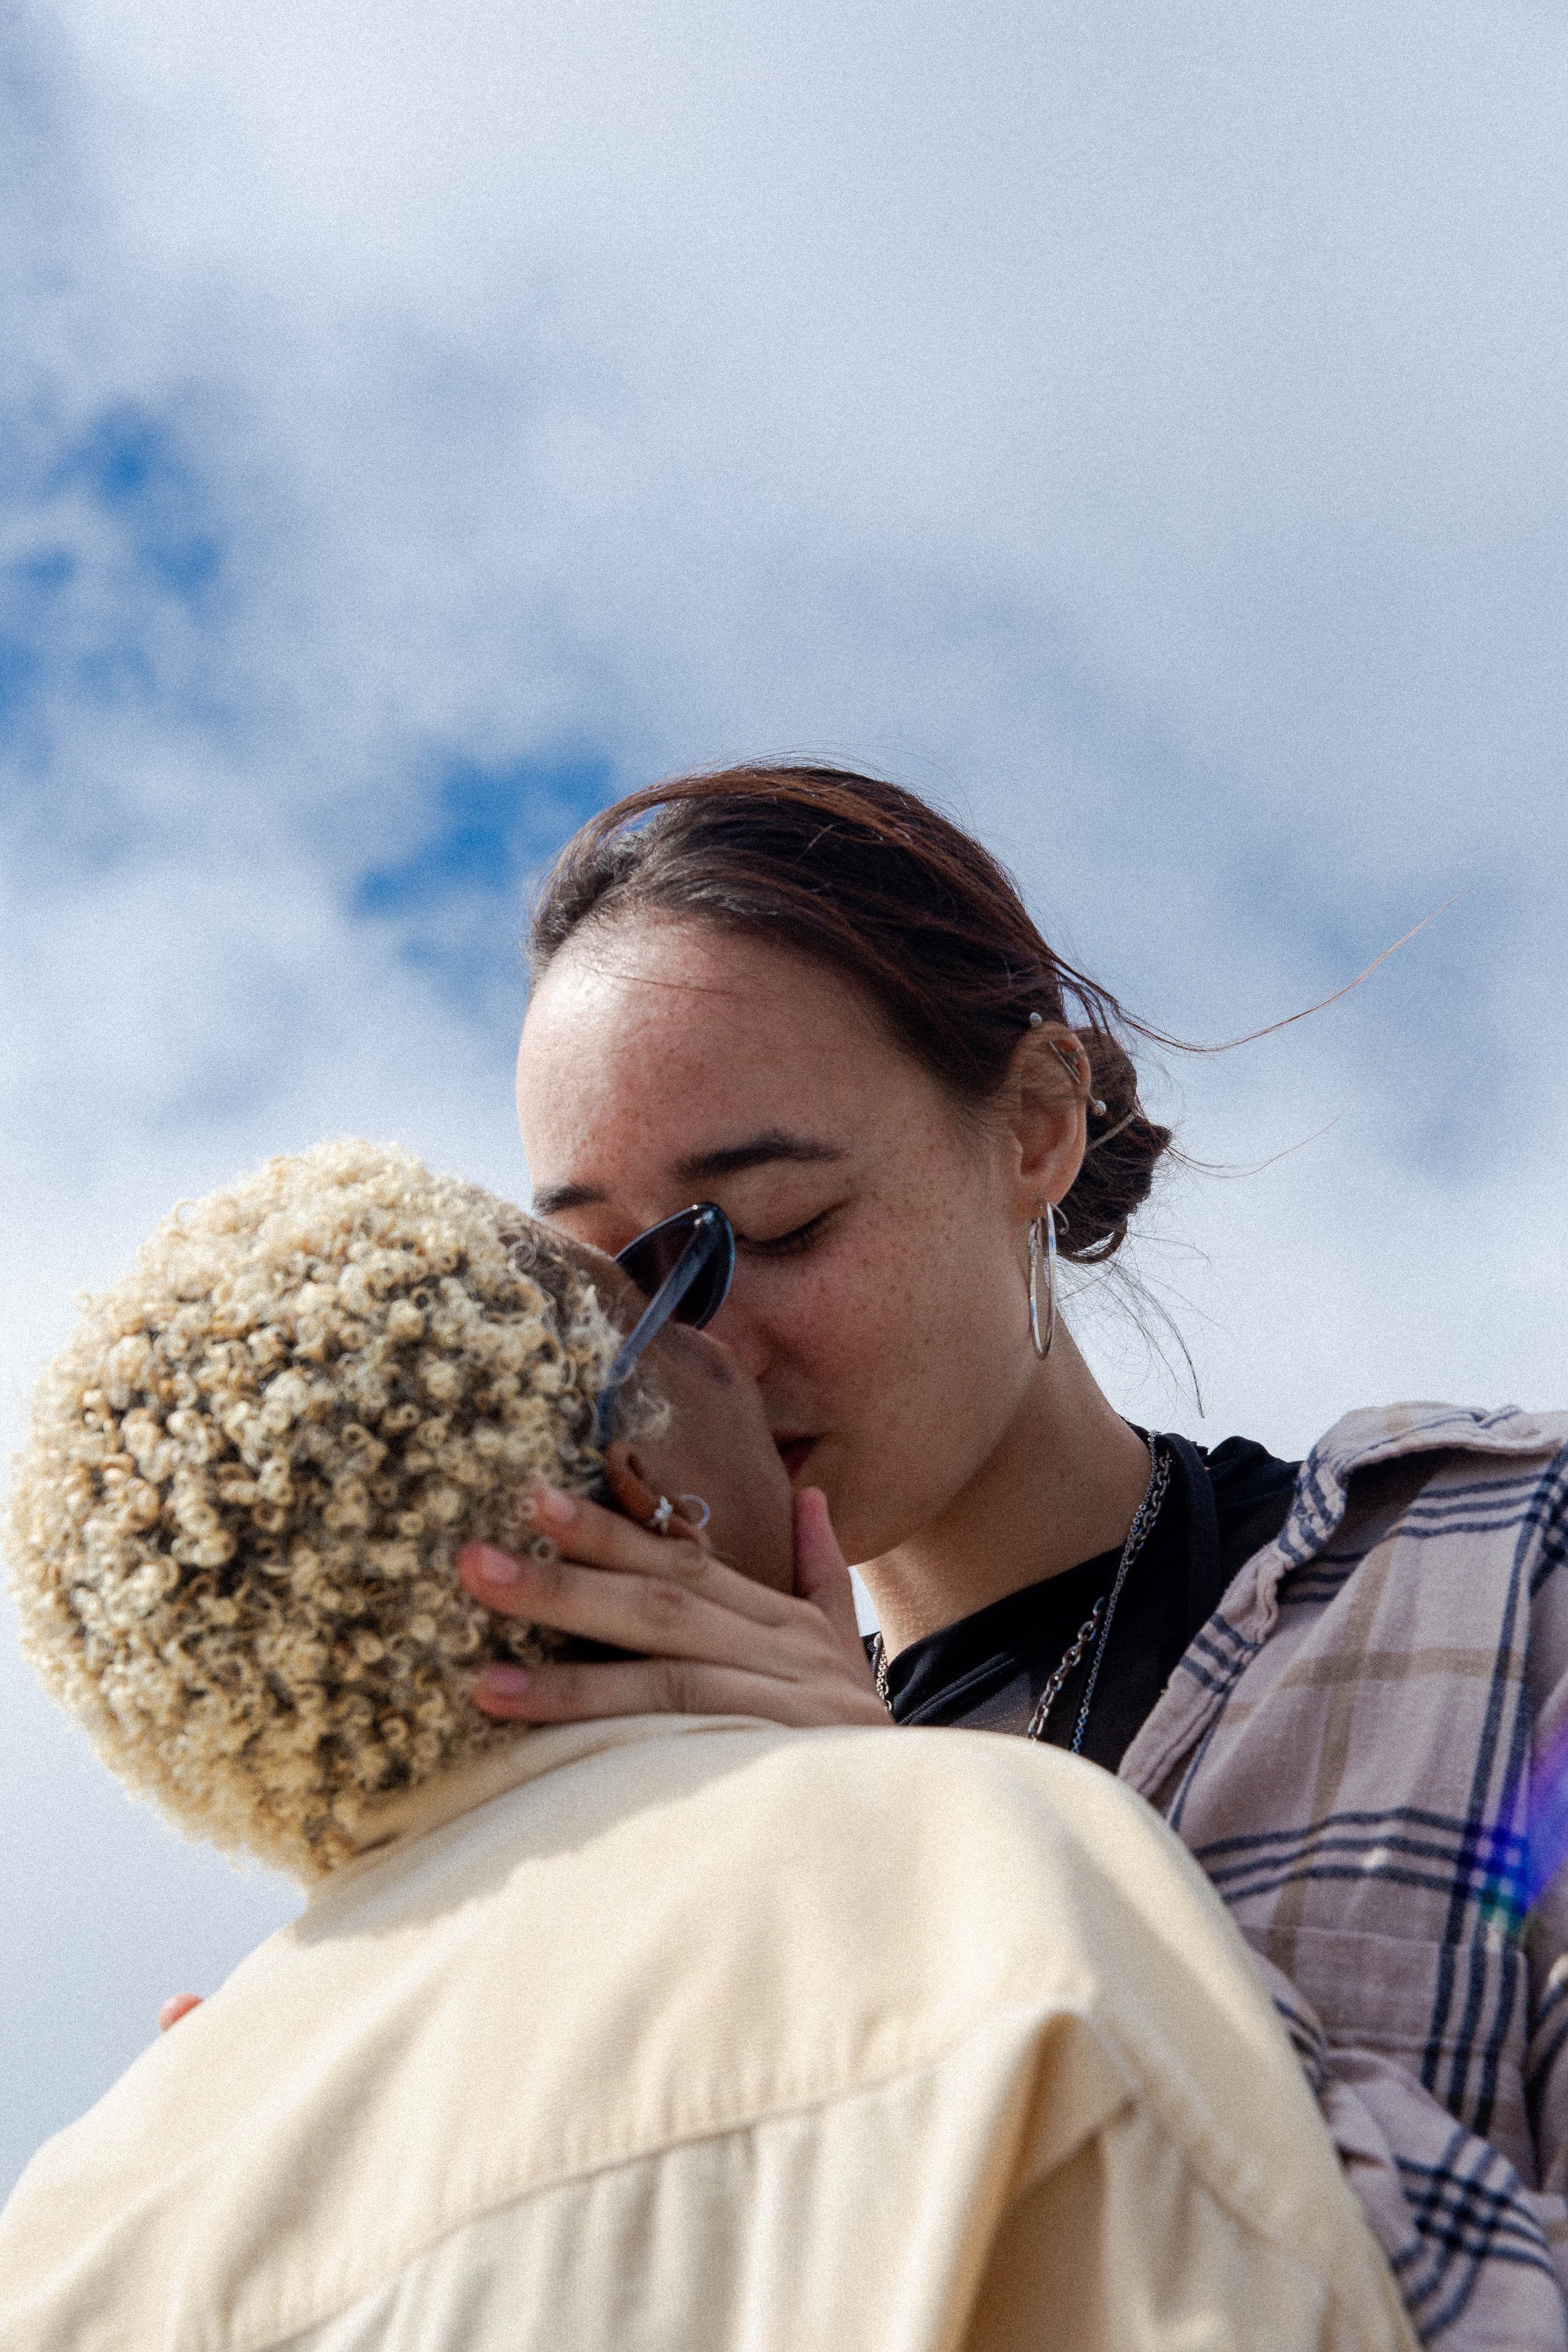 Two people kissing against a blue sky with clouds.